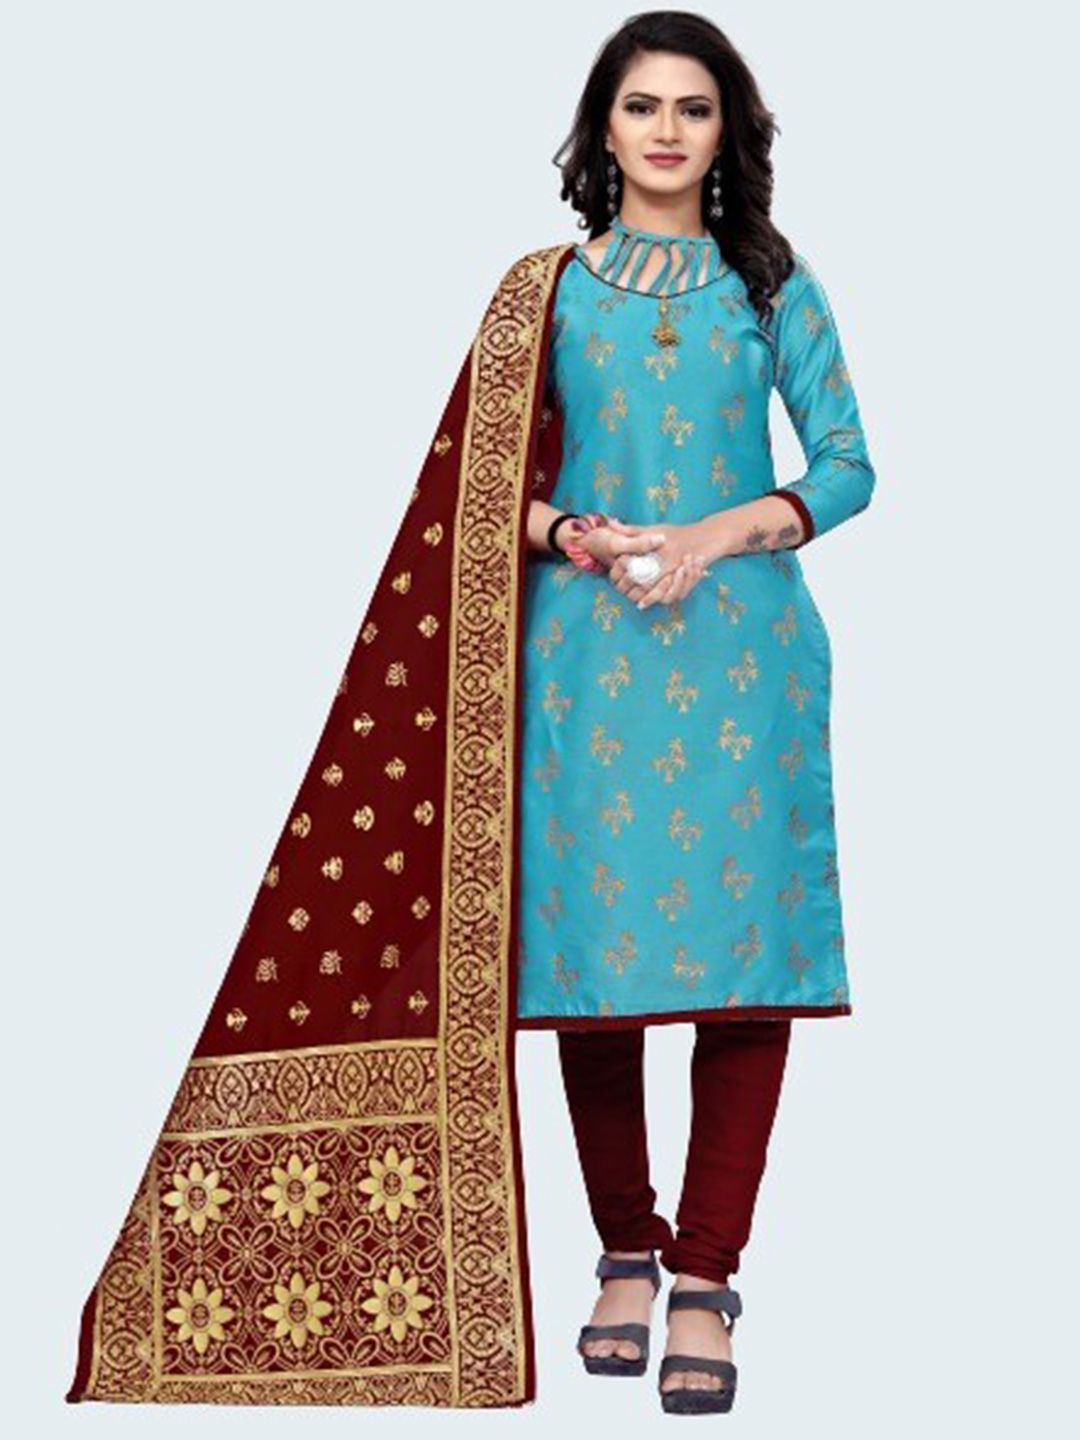 MORLY Women Turquoise Blue & Maroon Dupion Silk Unstitched Dress Material Price in India